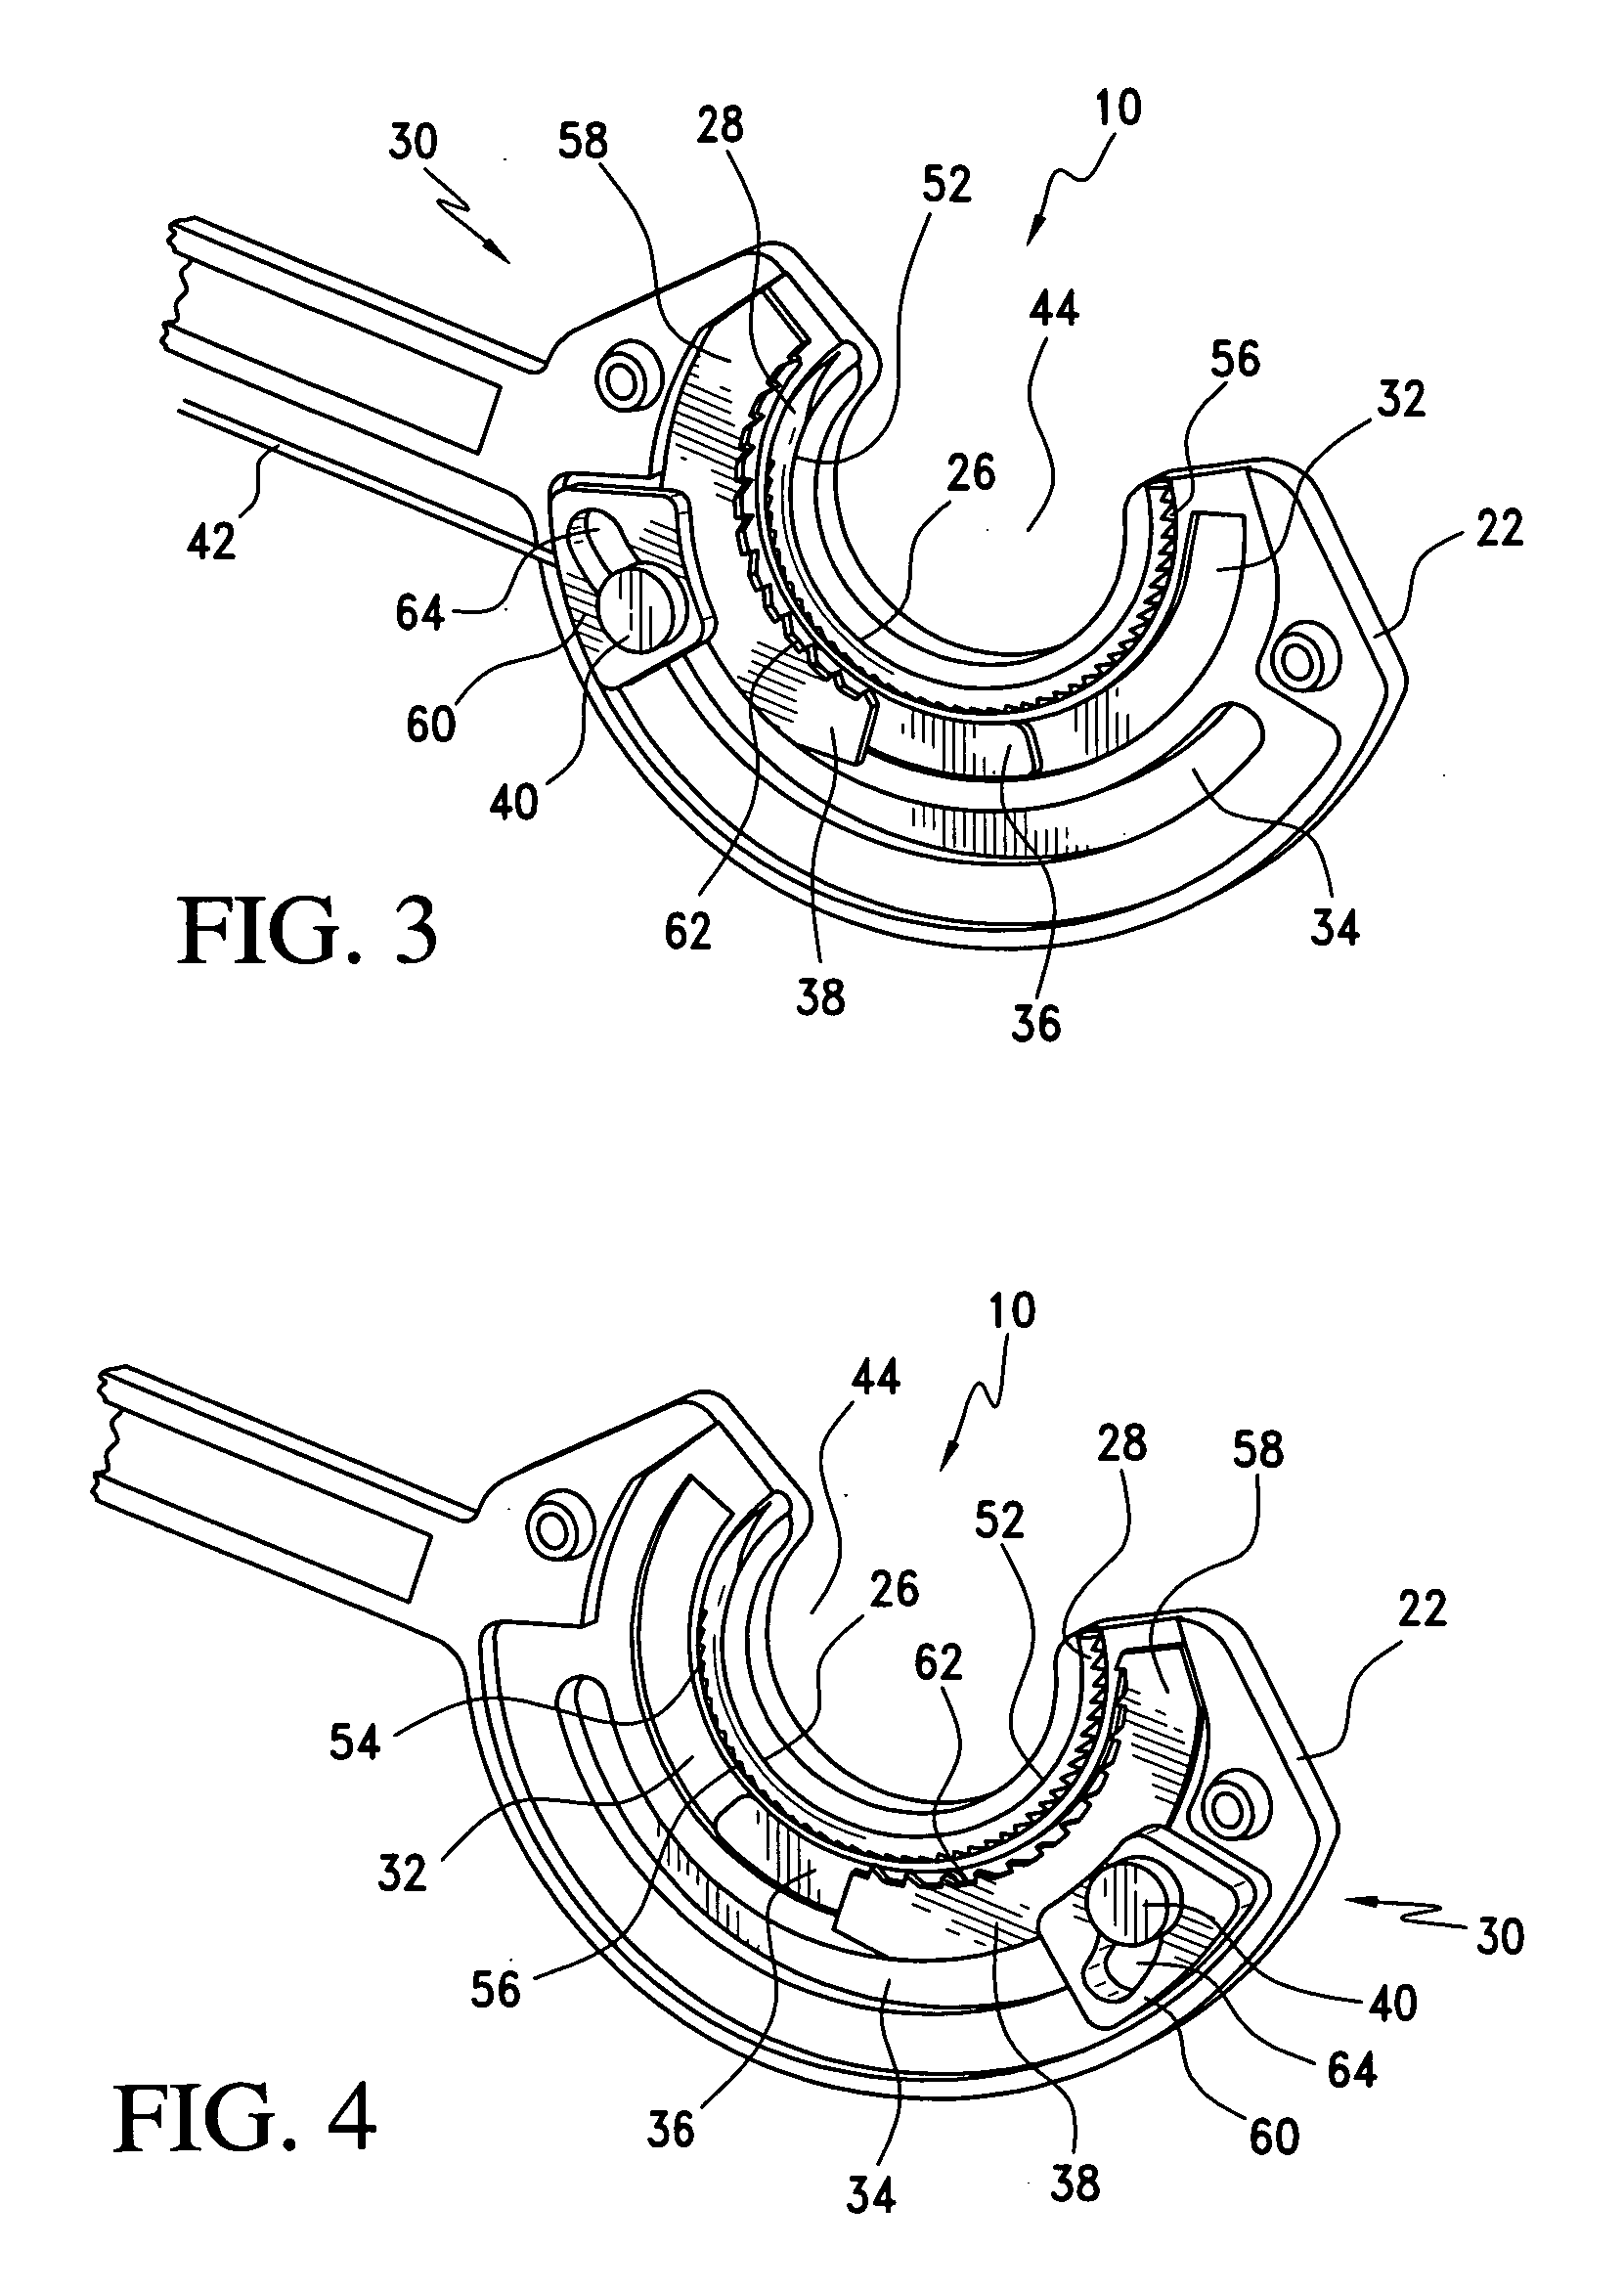 Surgical suturing apparatus with collapsible vacuum chamber